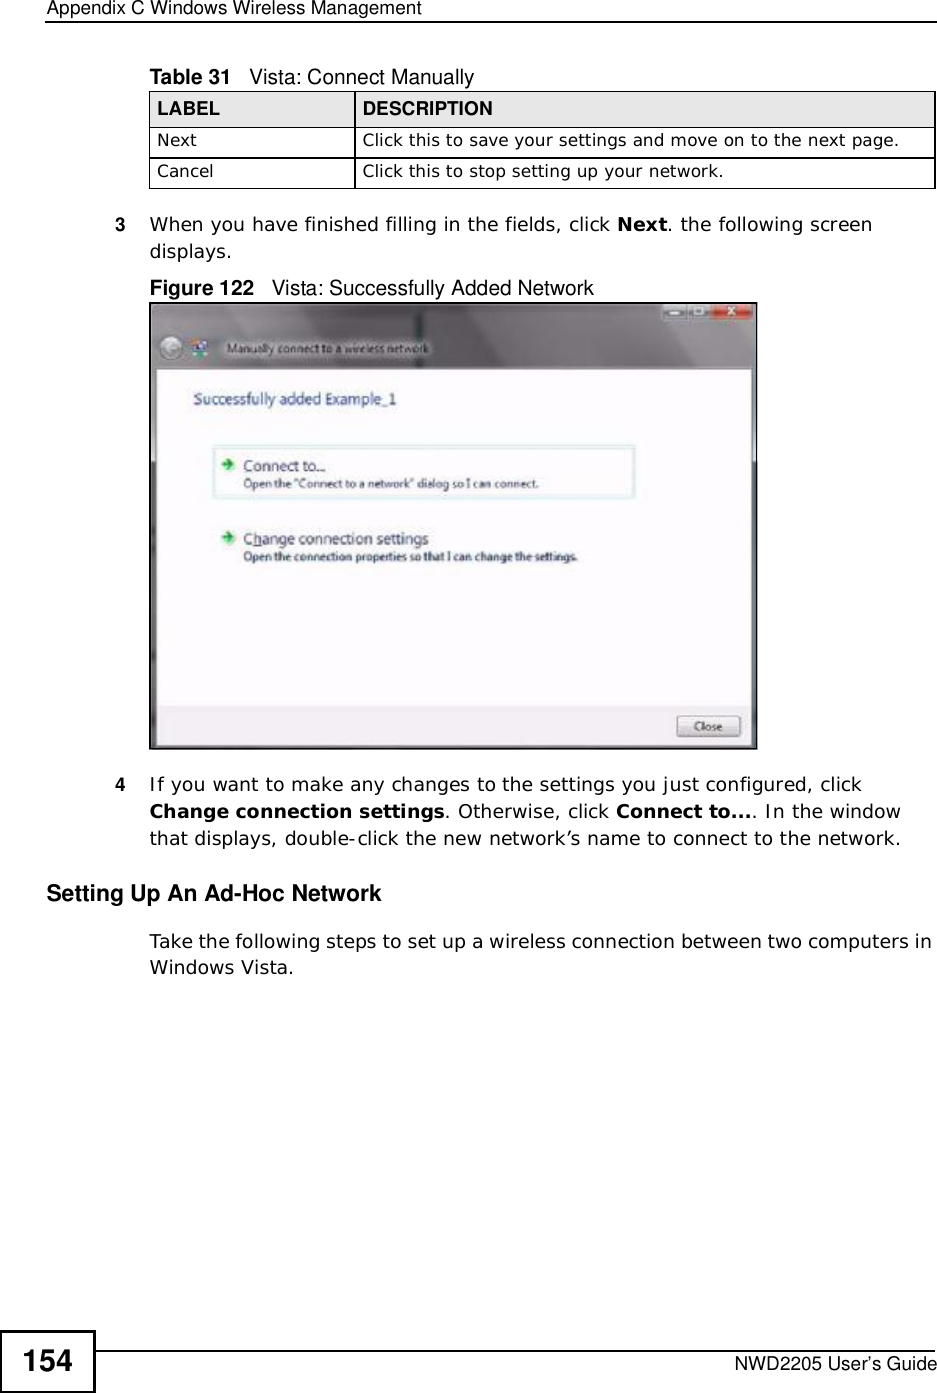 Appendix CWindows Wireless ManagementNWD2205 User’s Guide1543When you have finished filling in the fields, click Next. the following screen displays.Figure 122   Vista: Successfully Added Network4If you want to make any changes to the settings you just configured, click Change connection settings. Otherwise, click Connect to.... In the window that displays, double-click the new network’s name to connect to the network.Setting Up An Ad-Hoc Network Take the following steps to set up a wireless connection between two computers in Windows Vista. NextClick this to save your settings and move on to the next page.CancelClick this to stop setting up your network.Table 31   Vista: Connect ManuallyLABEL DESCRIPTION